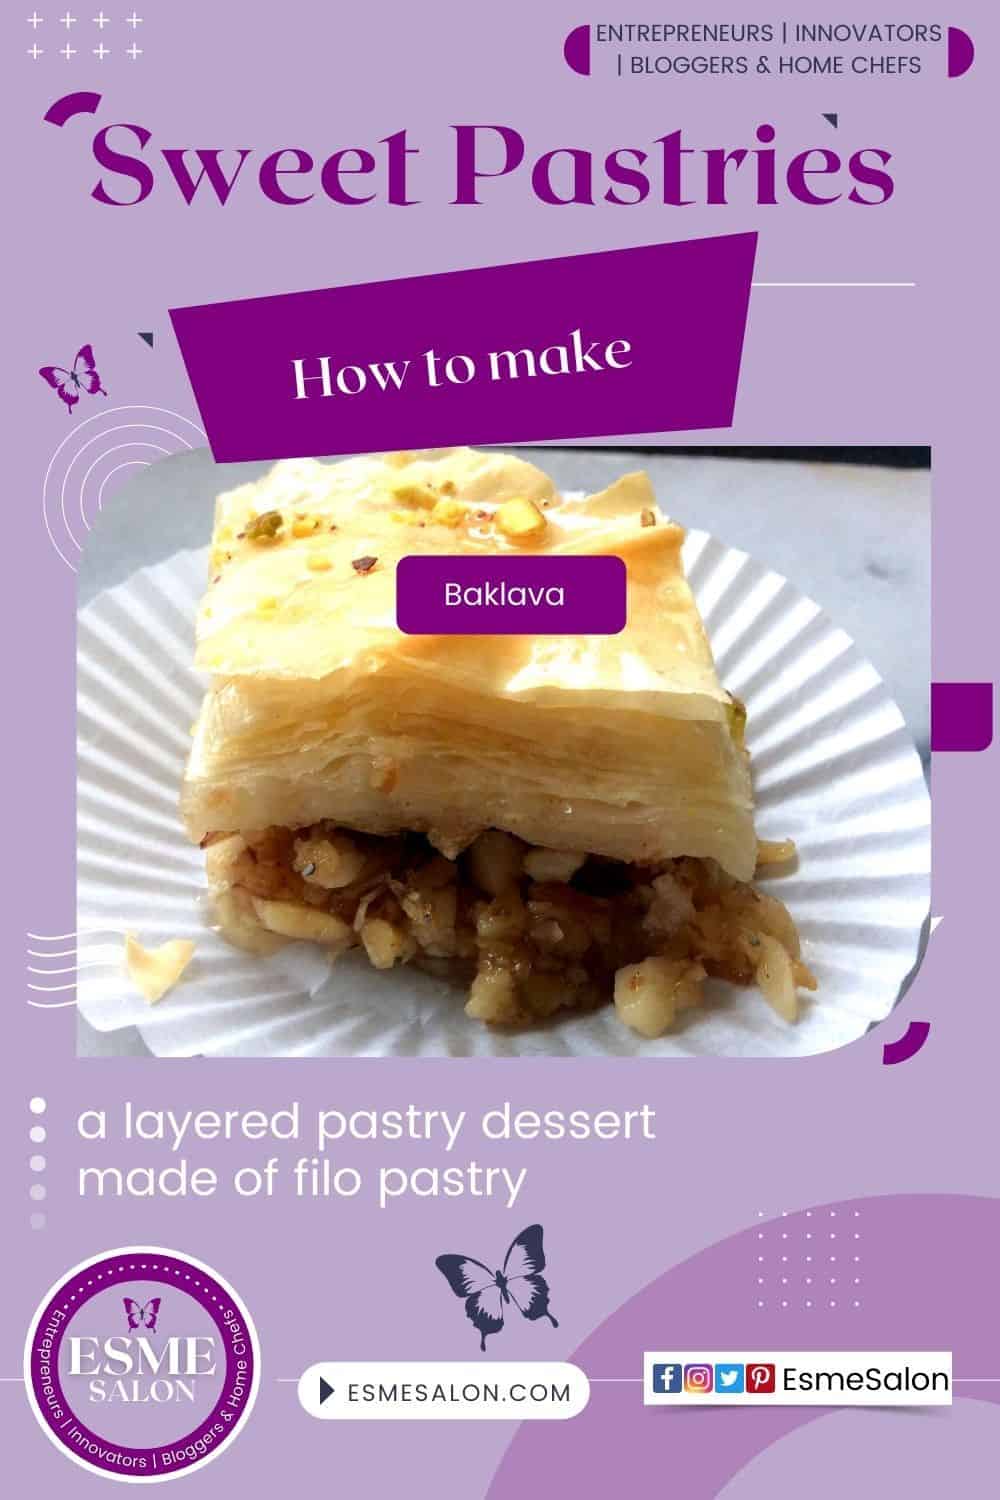 Baklava Philo pastry dessert with nuts strewn over the top